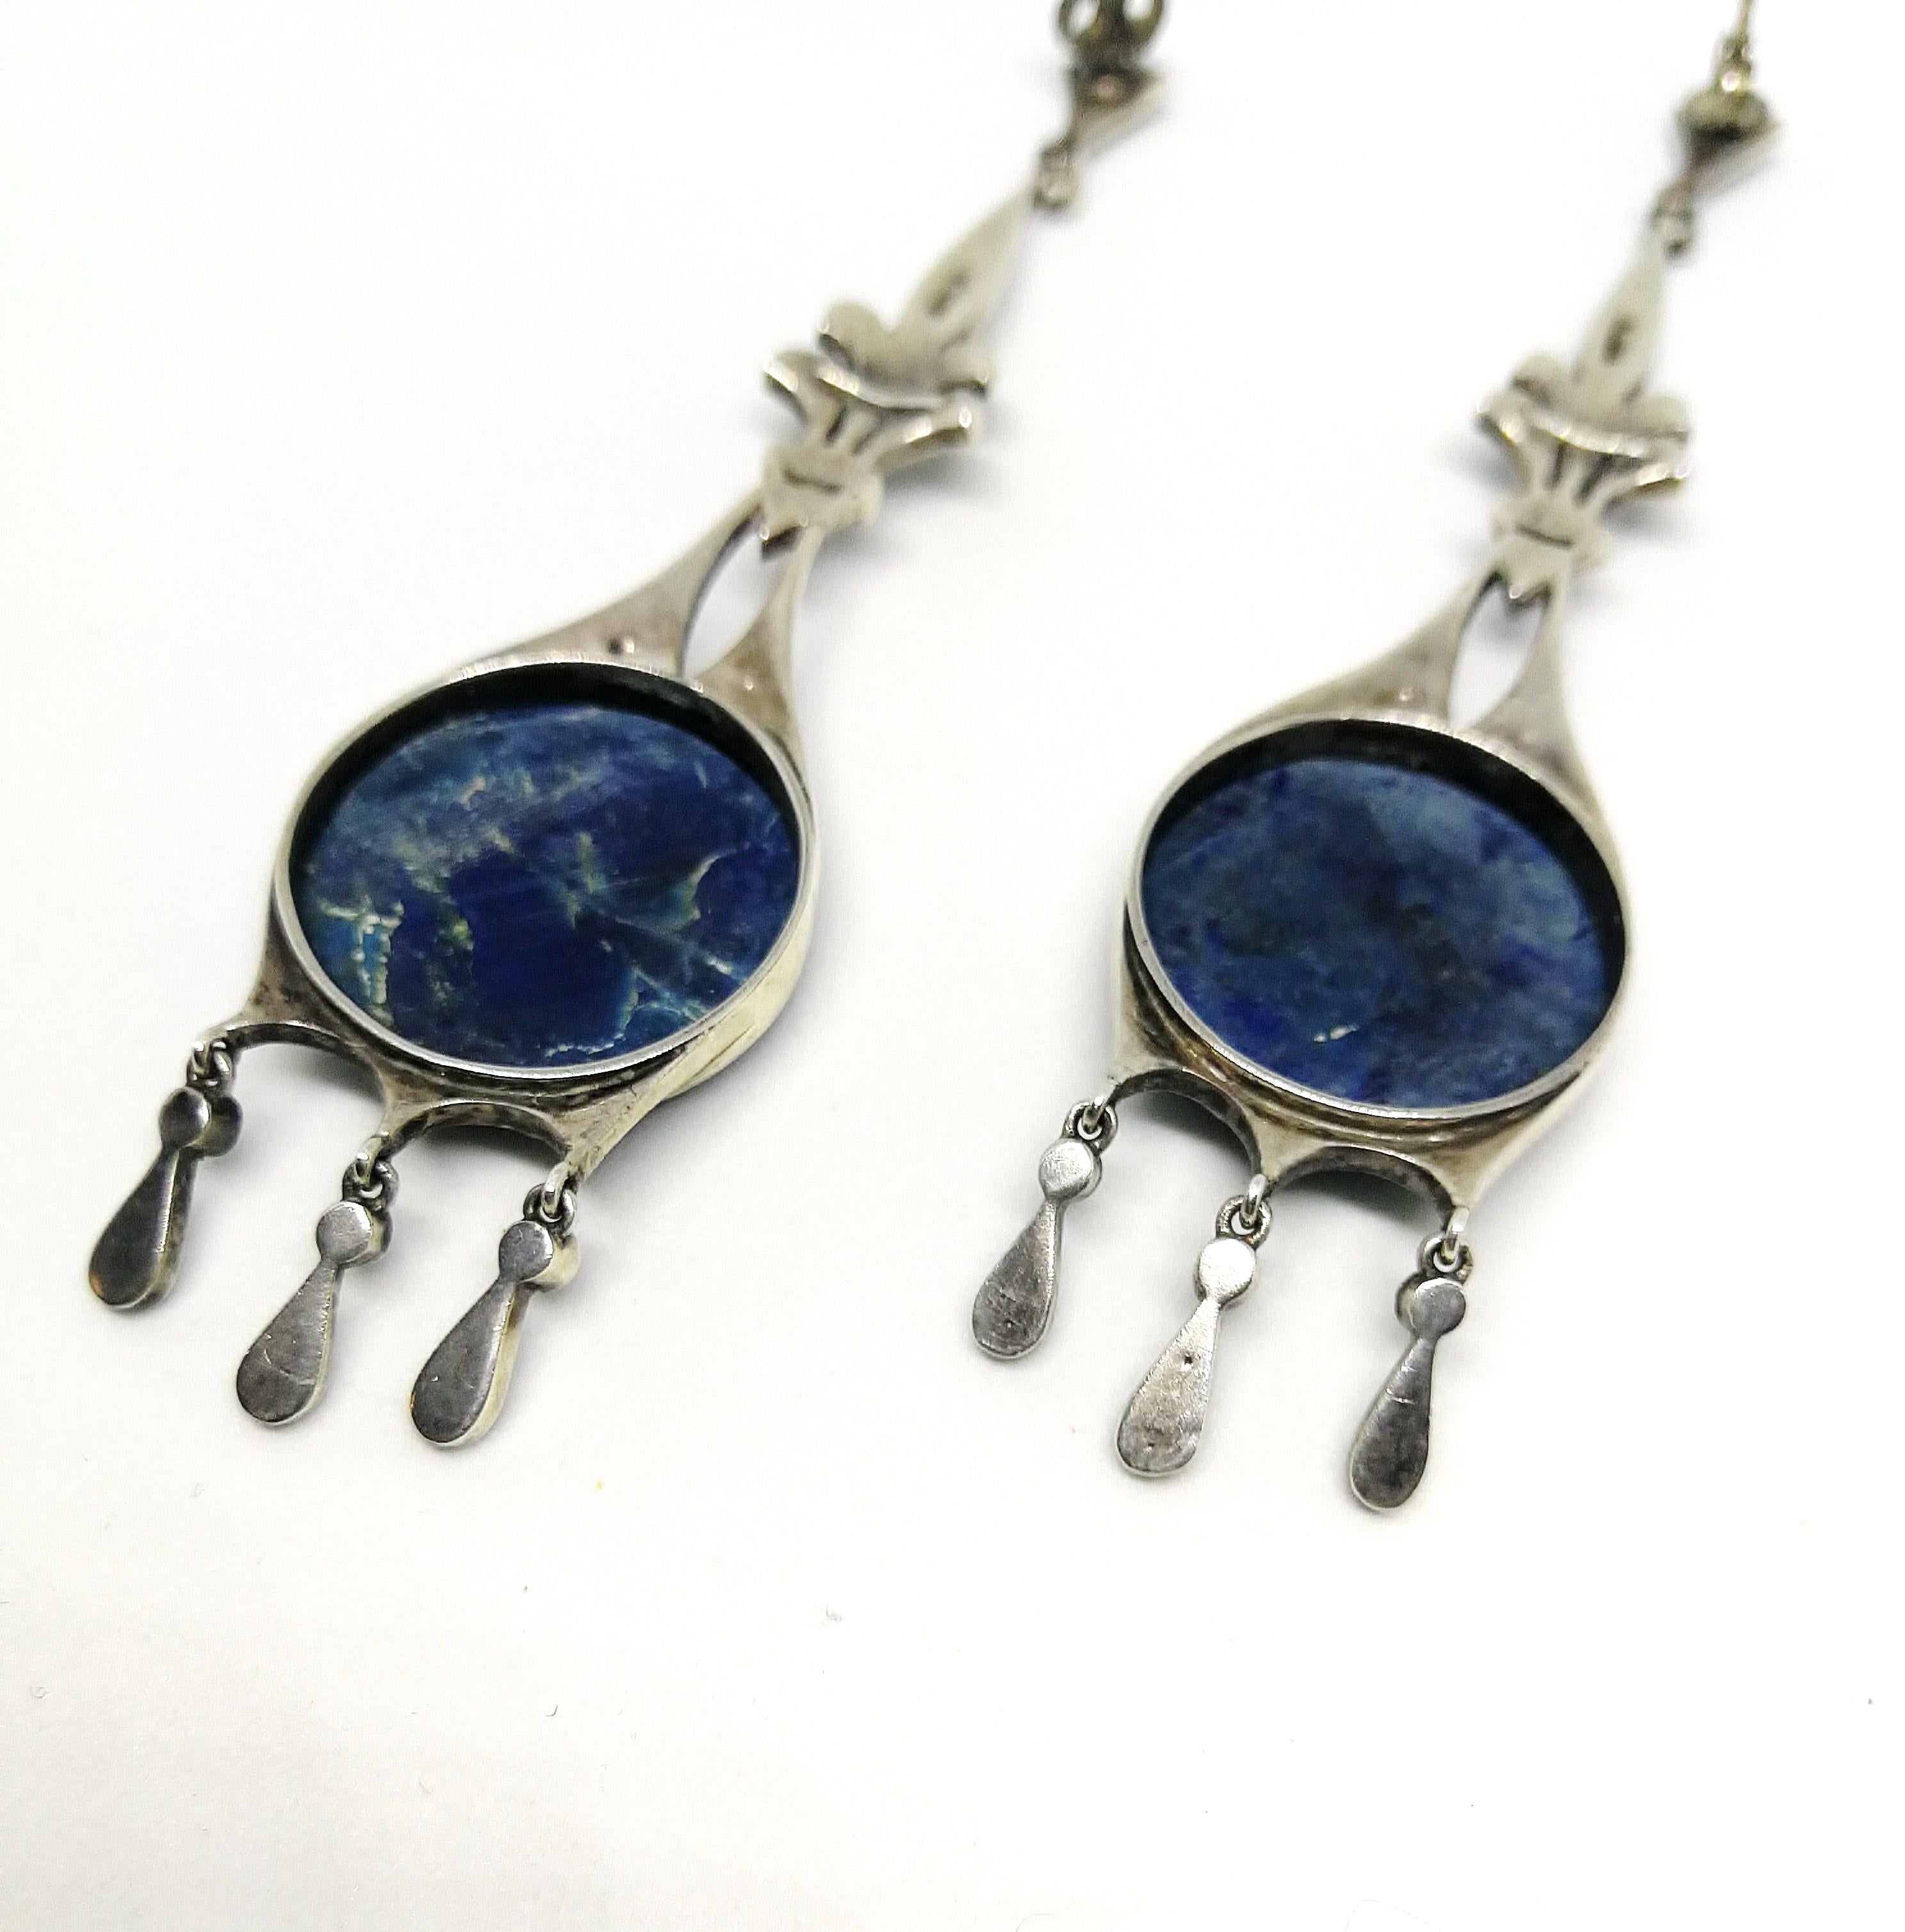 Women's Very long sodalite, marcasite and sterling silver drop earrings, France, 1920s